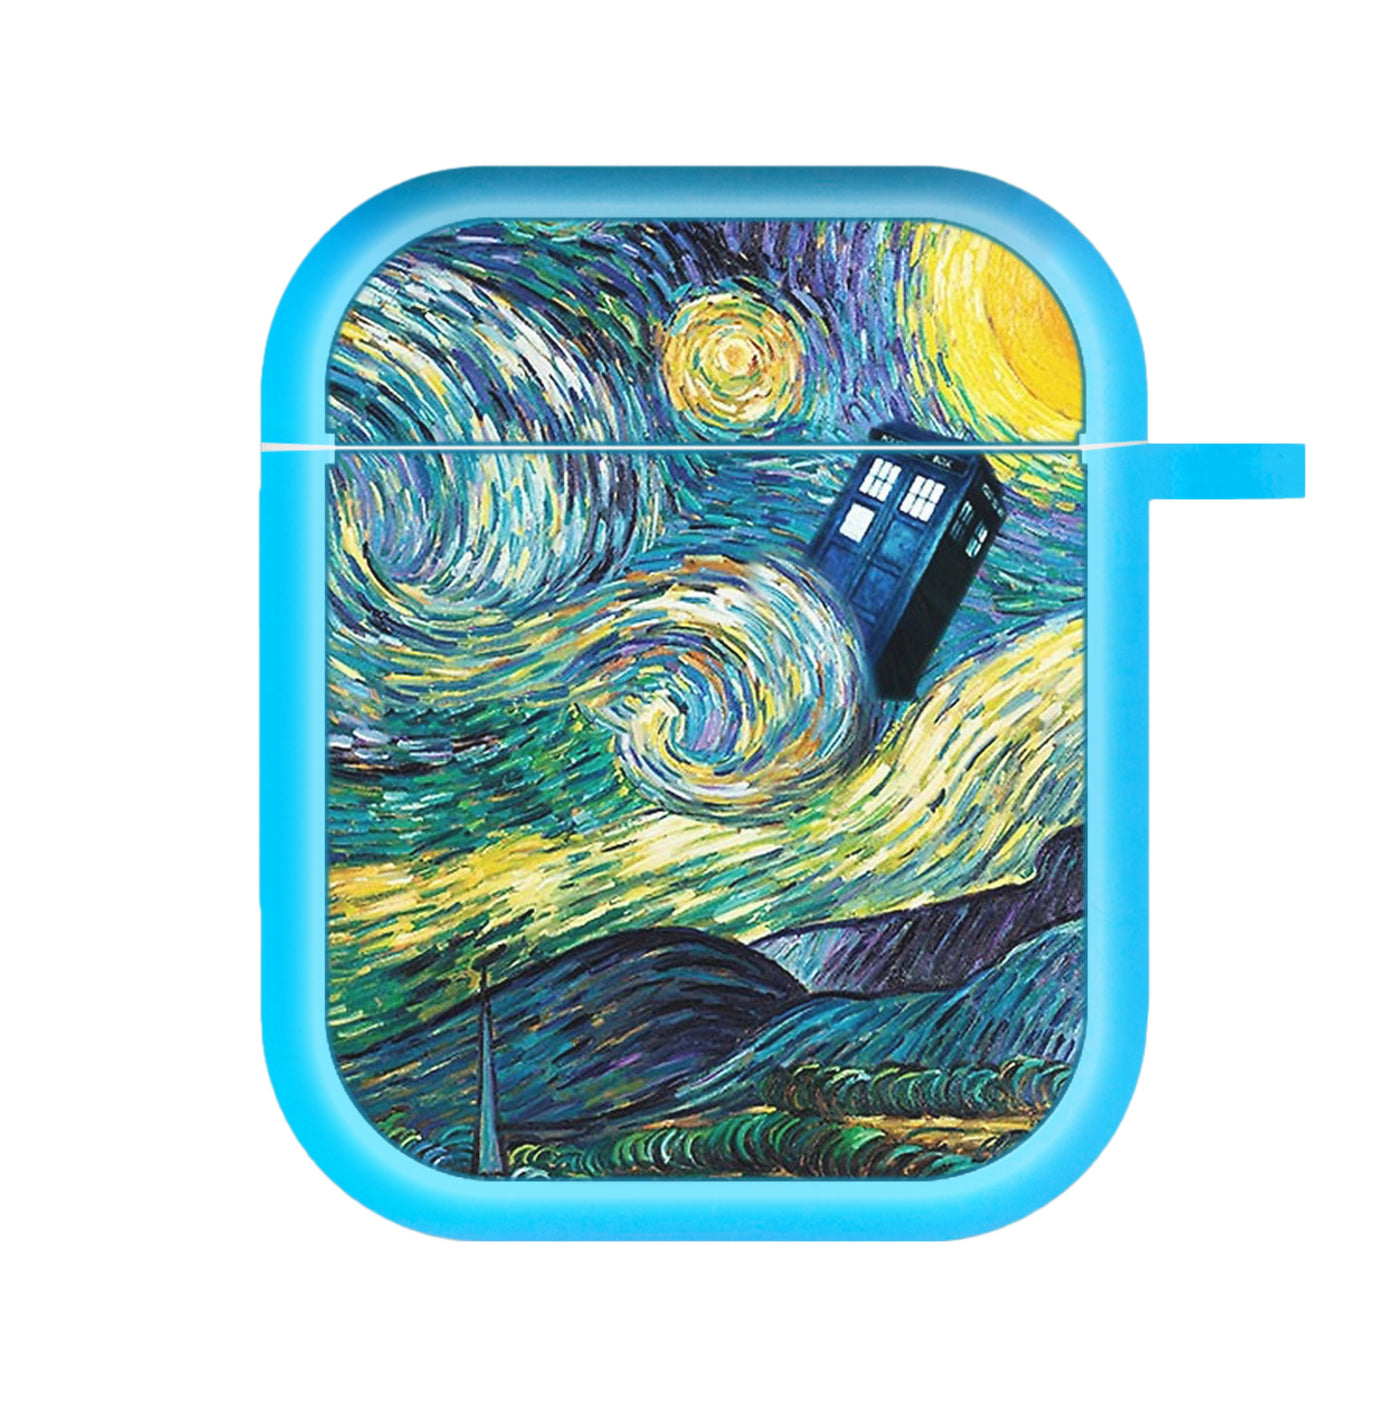 Starry Night Tardis - Doctor Who AirPods Case